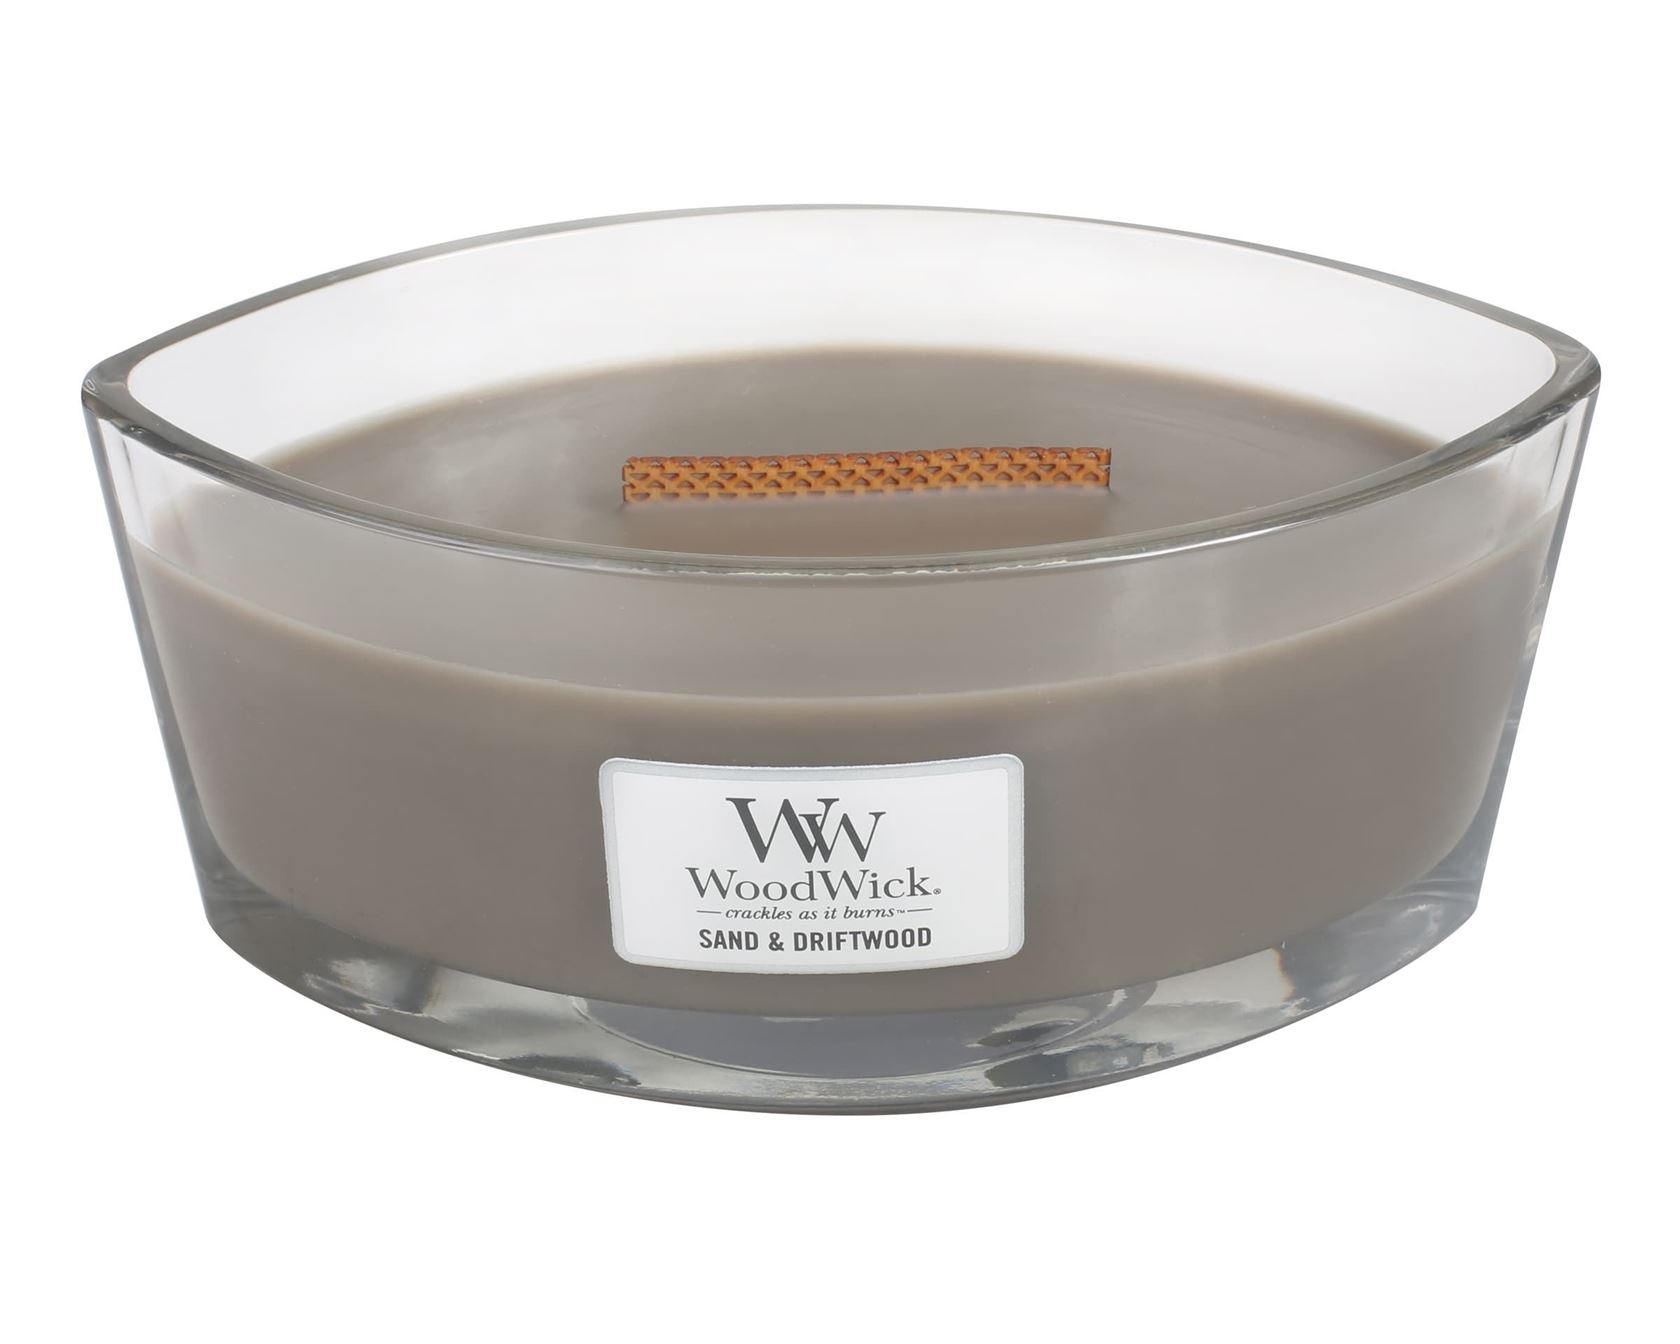 Woodwick Ellipse Candle - Sand & Driftwood - heartwick Flame - Geurkaars